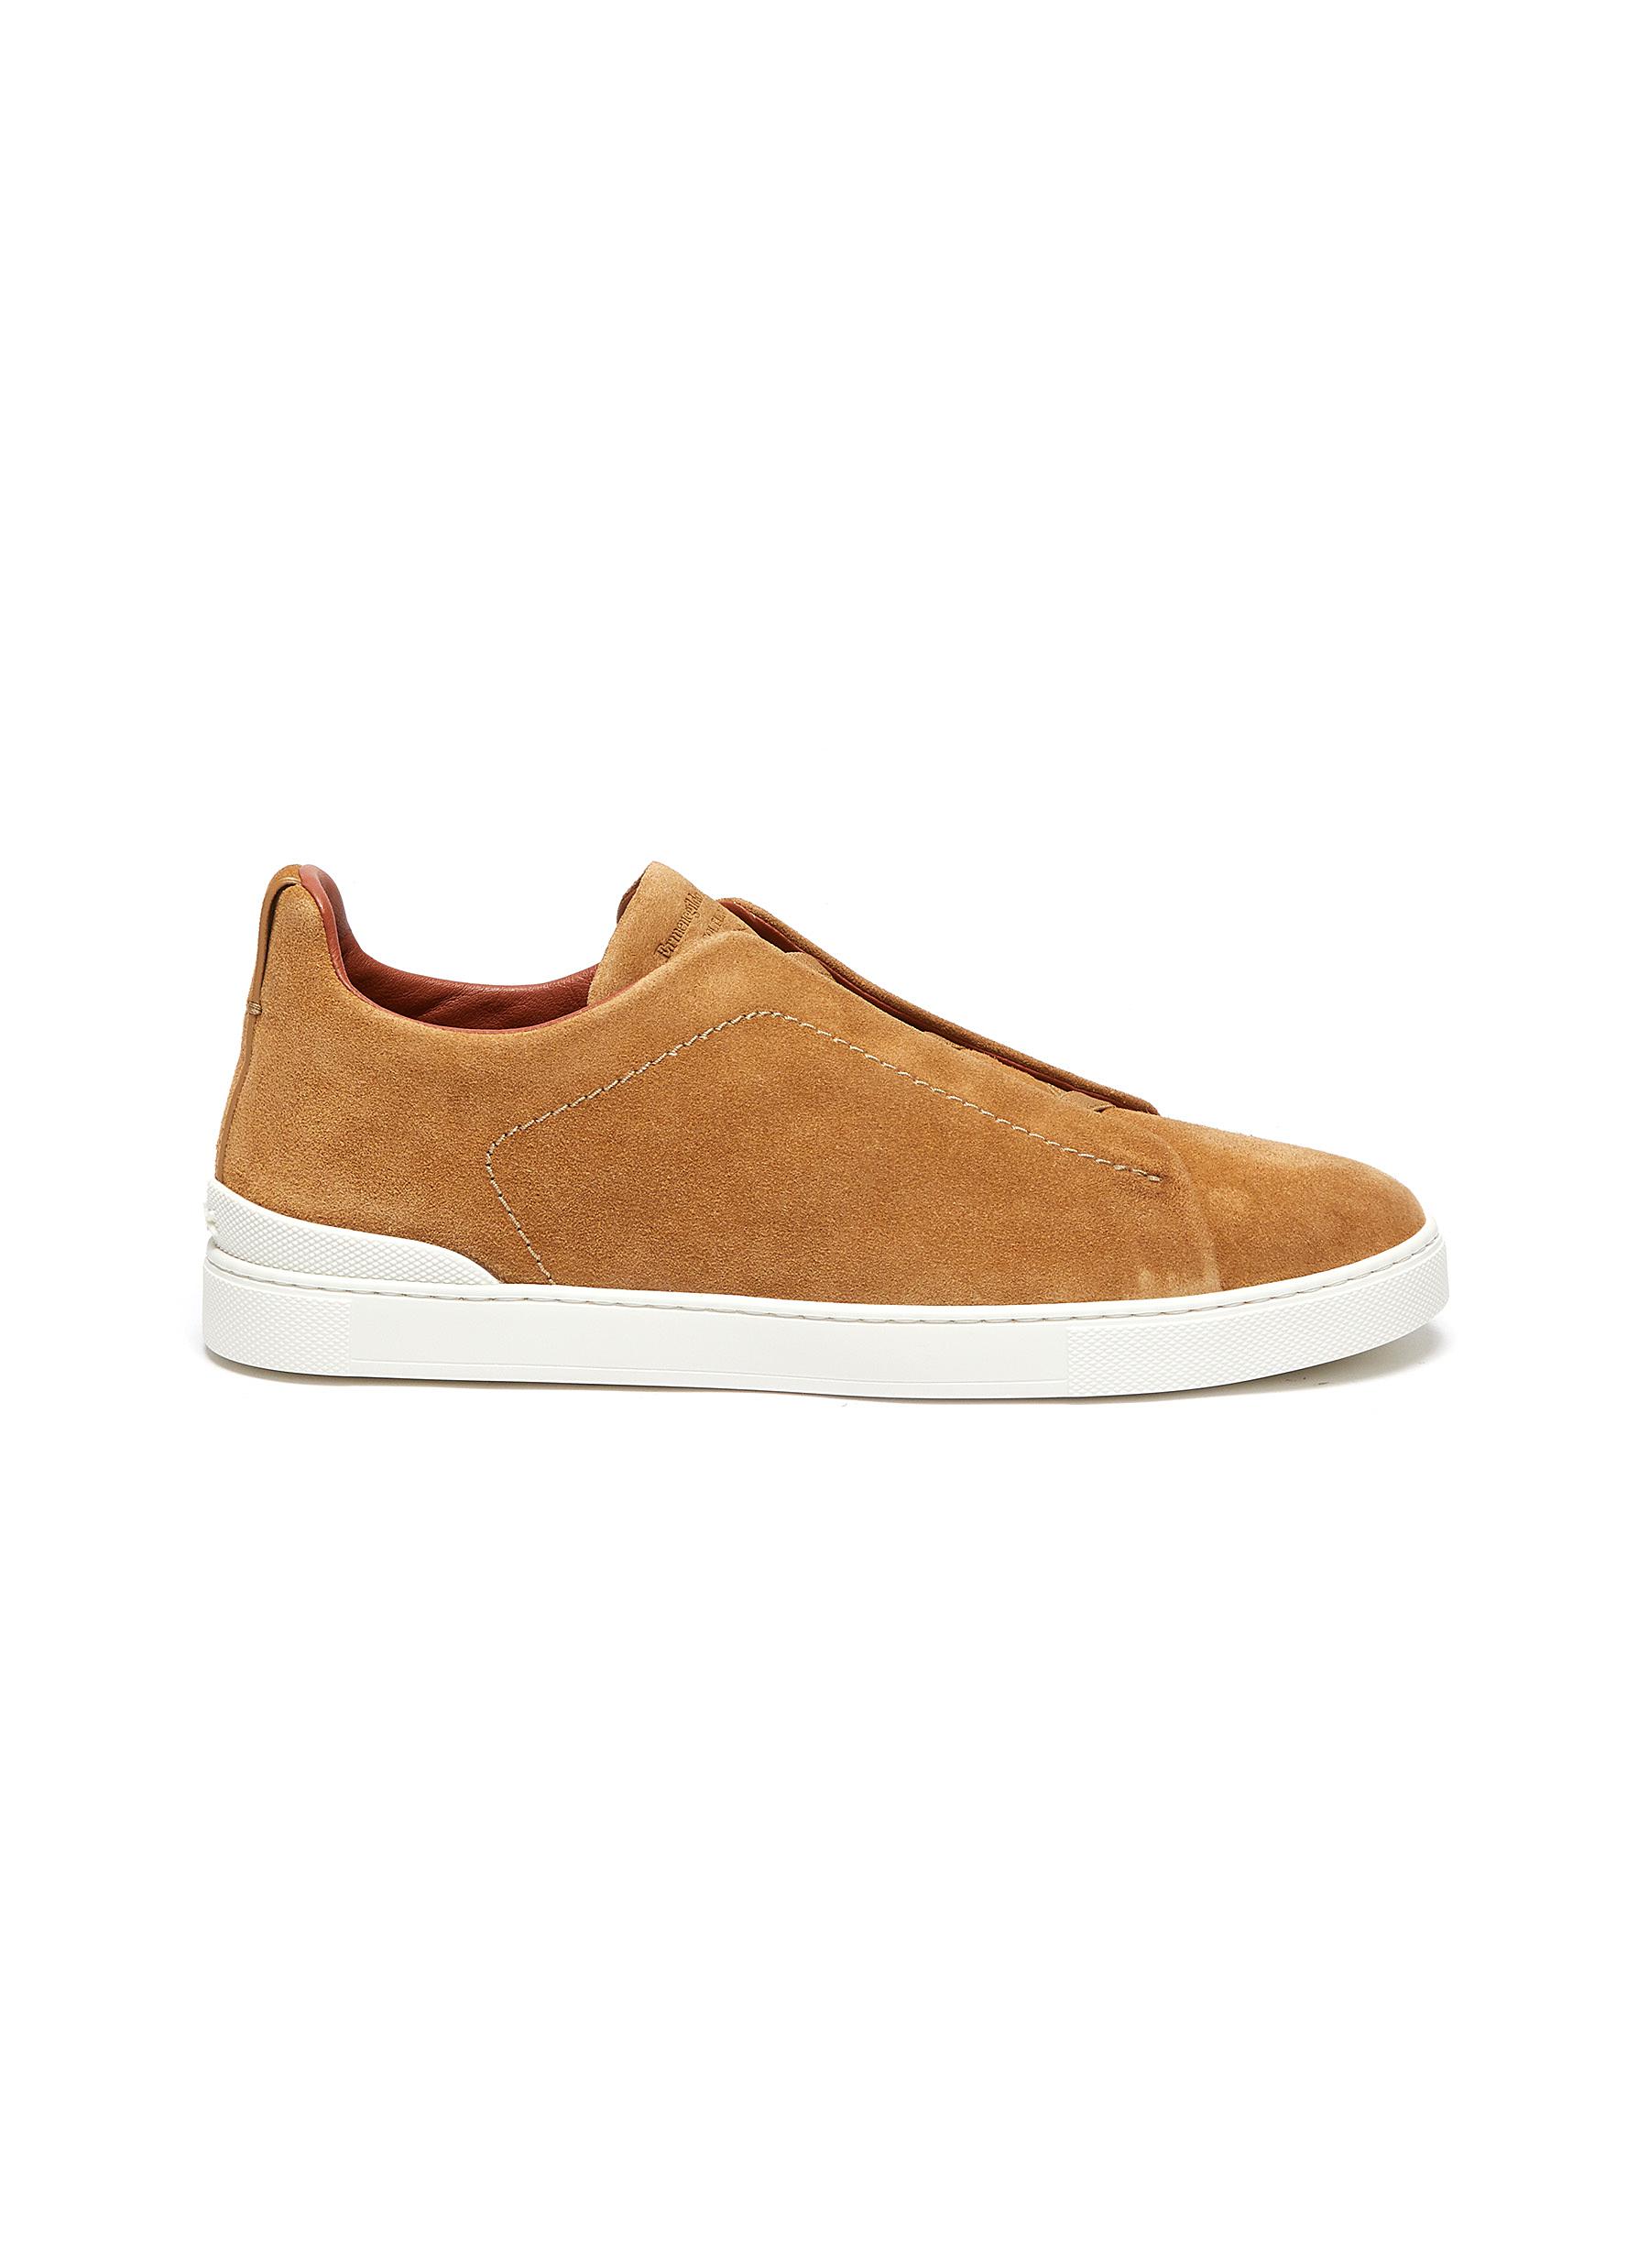 Triple Stitch Slip-on Suede Sneakers